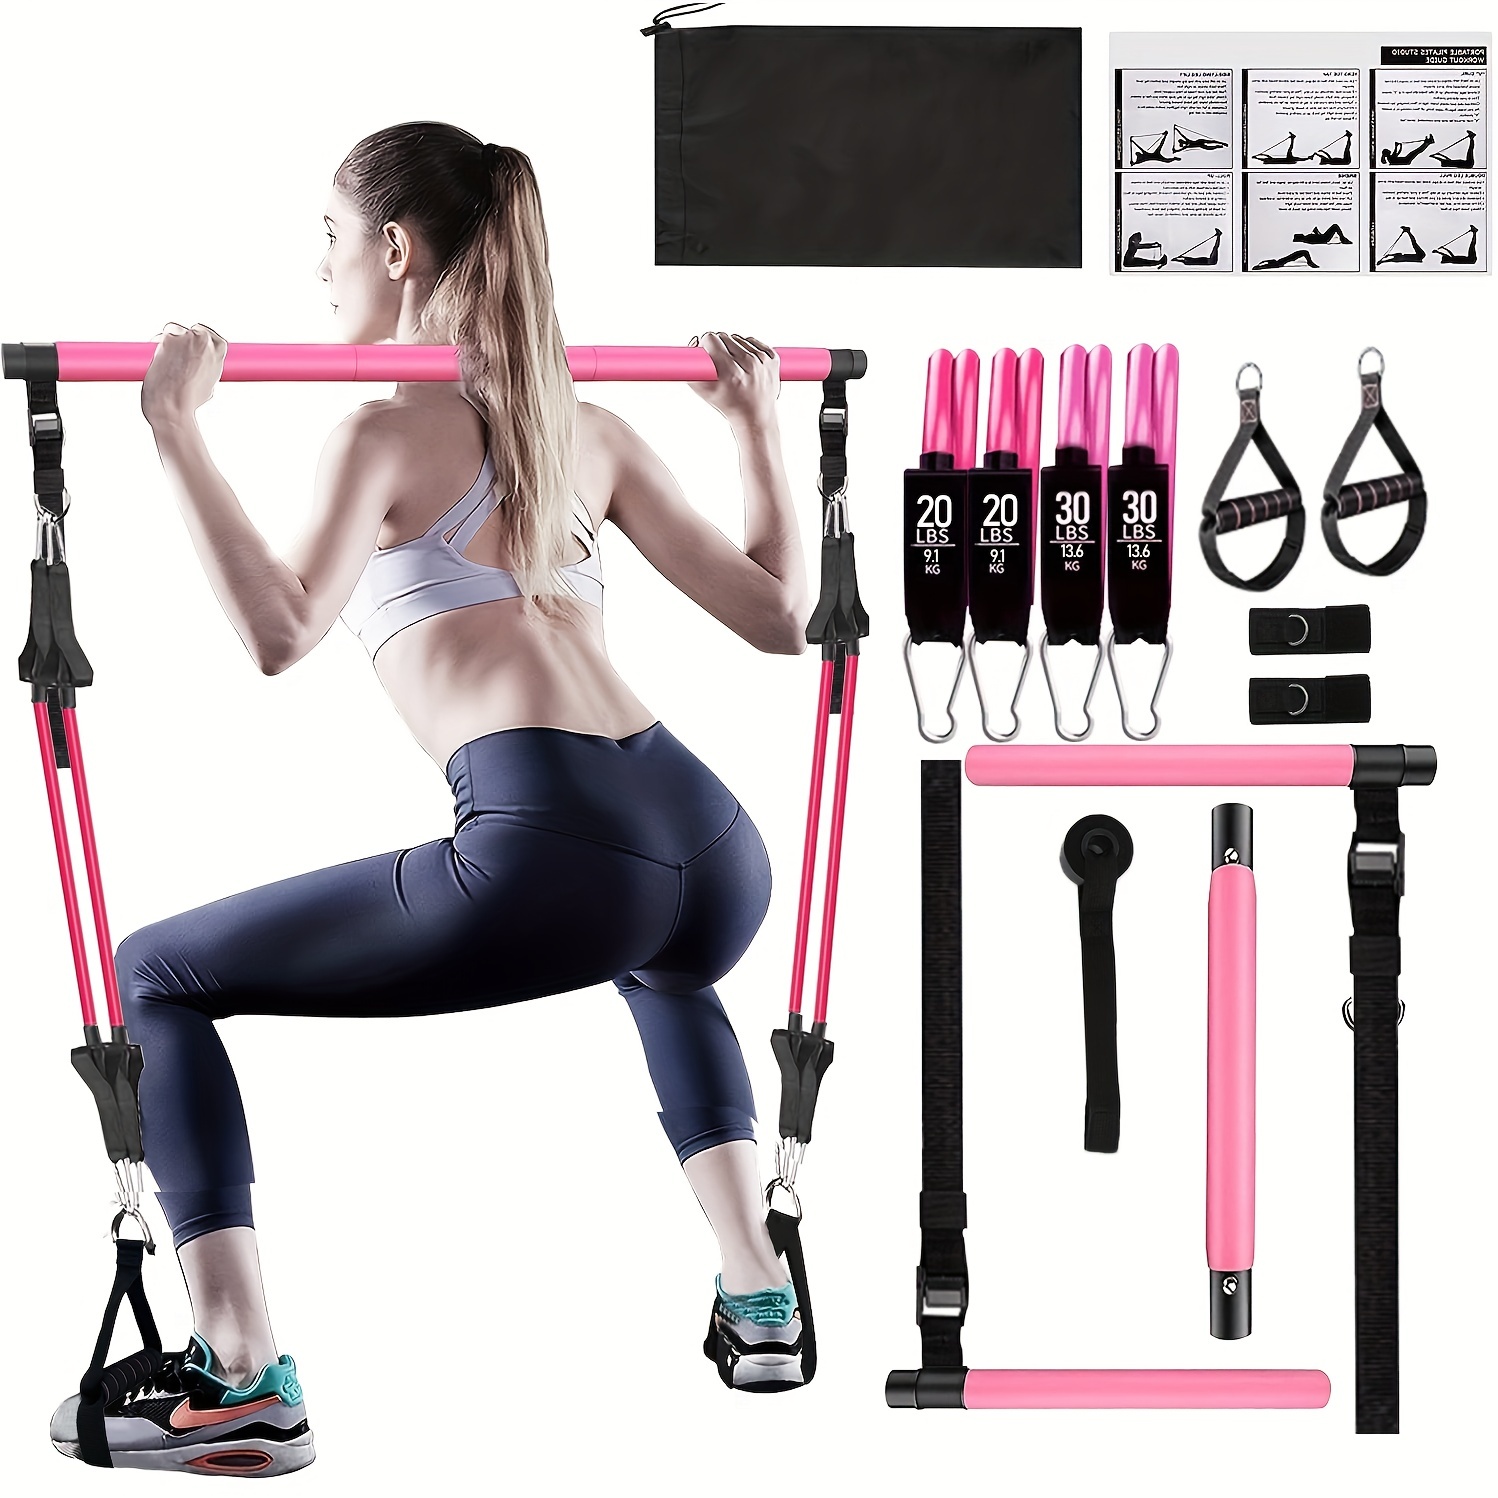 Adjustable Pilates Bar Kit: 4 Resistance Bands (30, 20 Lbs) And 3 Sections  Stackable Fitness Bar, Portable Multifunctional Fitness Equipment For Yoga